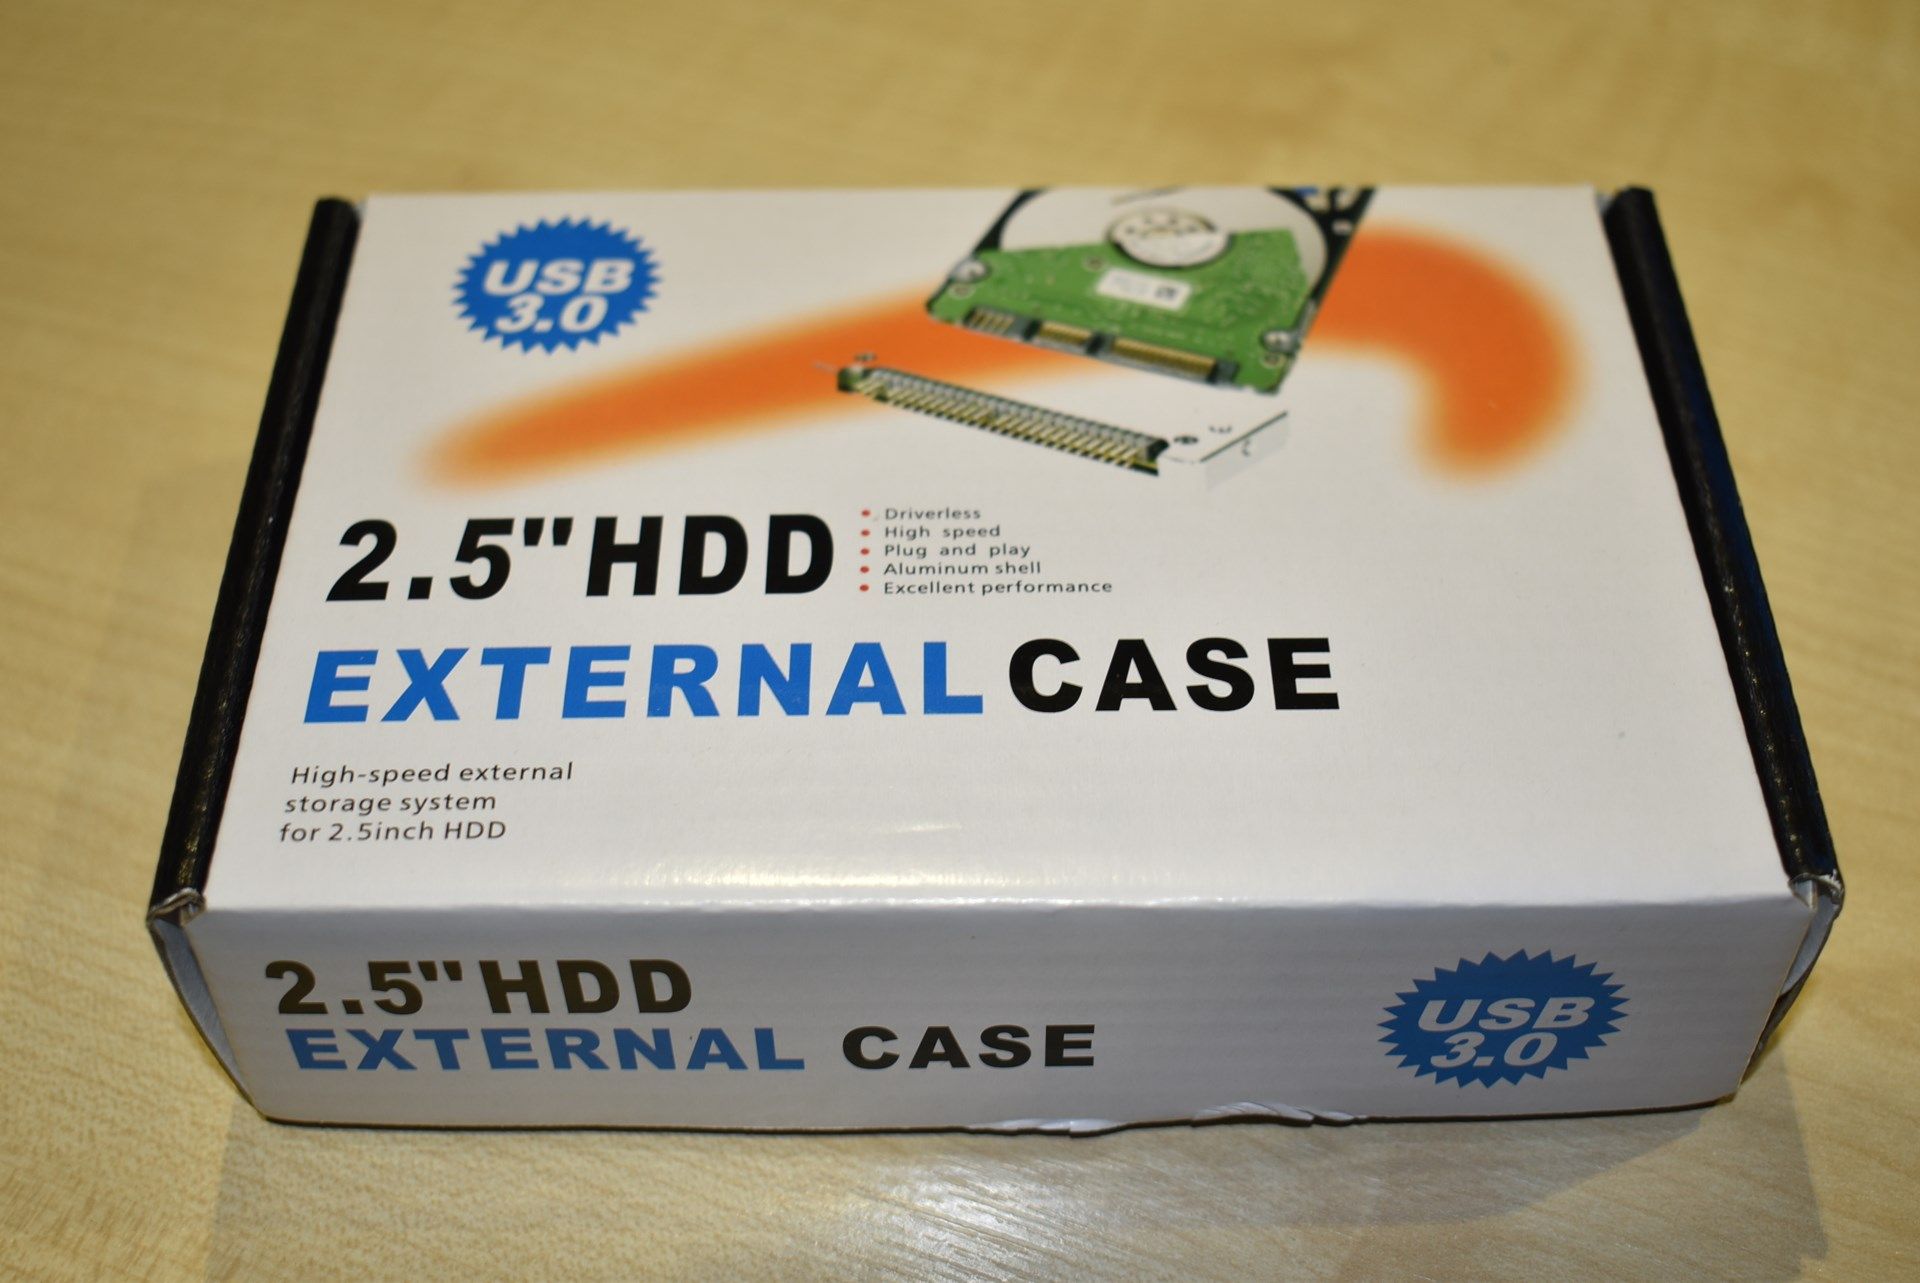 1 x External 500gb Hard Drive - Fast USB 3.0 External Drive With Aluminum Case, Carry Pouch and - Image 2 of 2